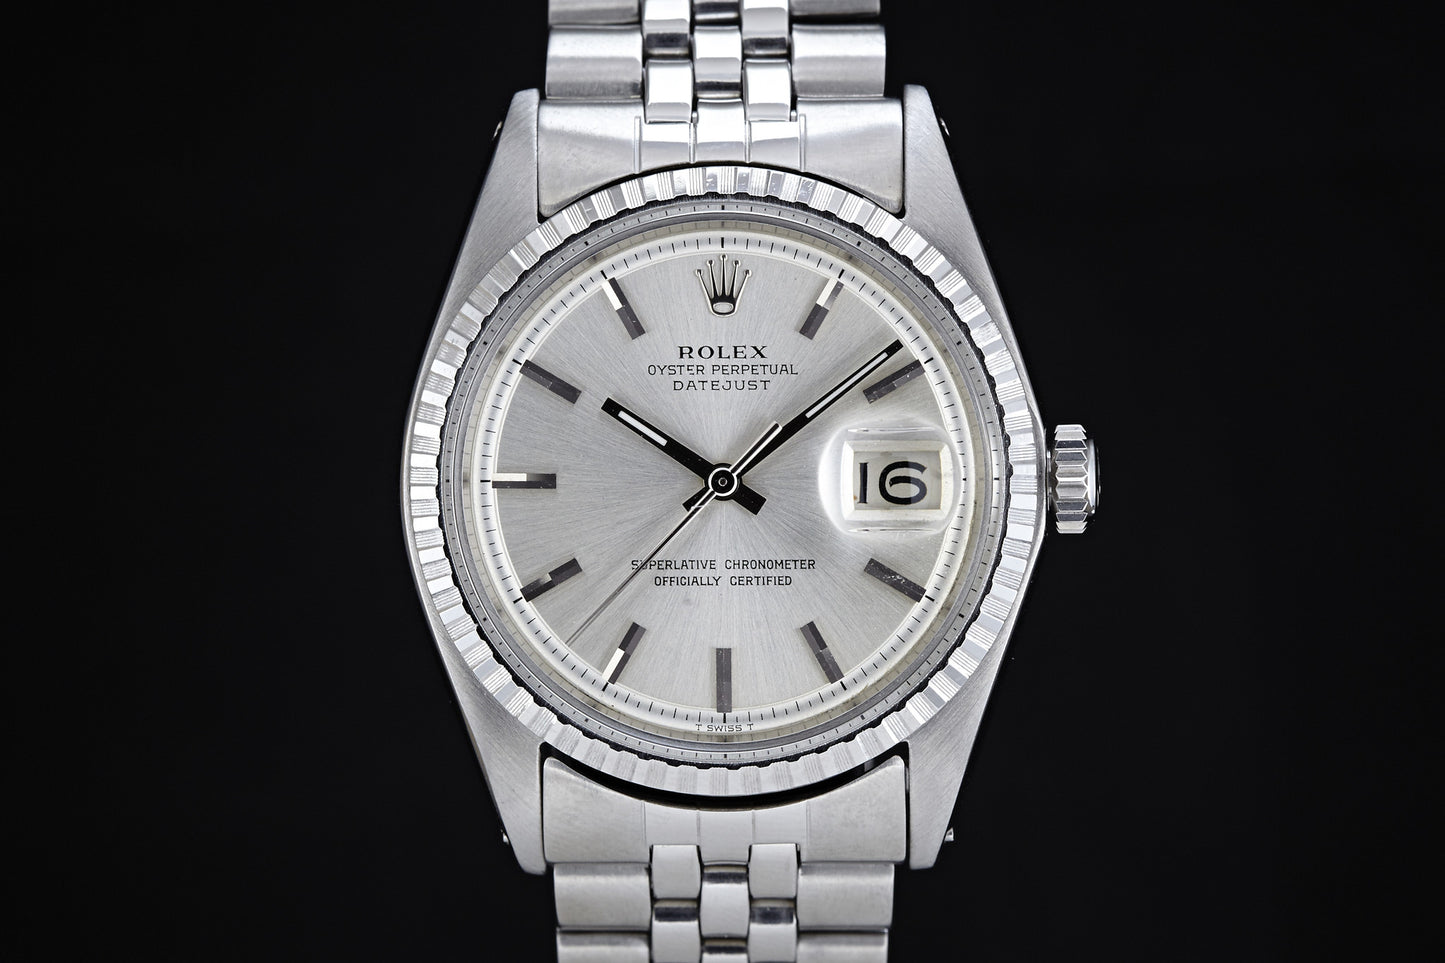 Rolex Datejust Reference 1603 - 1966